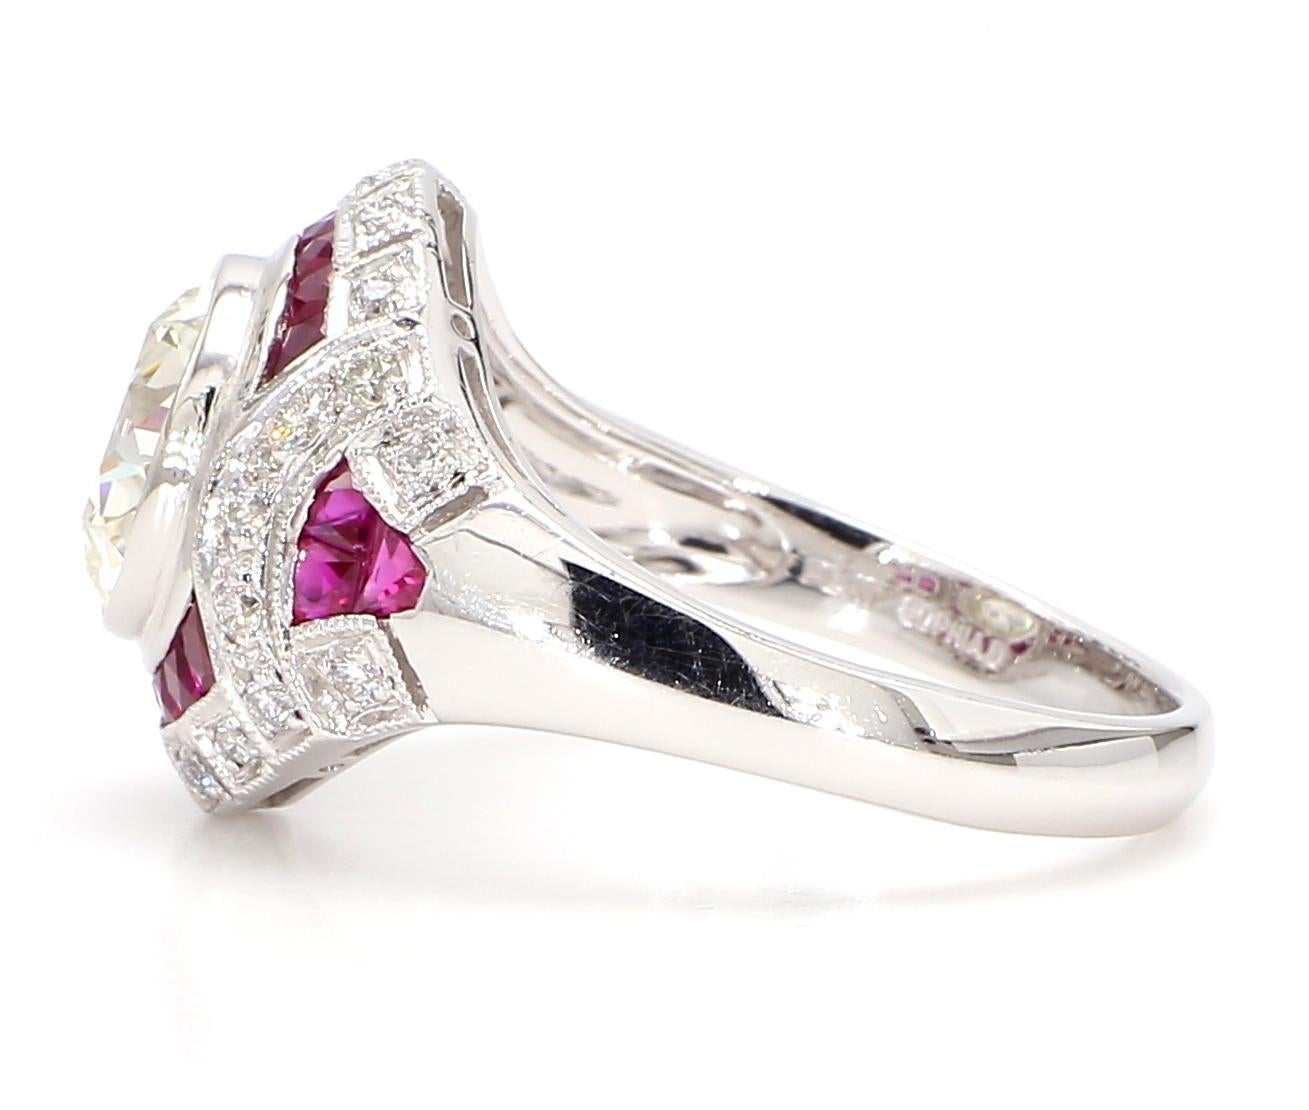 GIA Certified 2.56 Carat Diamond and 1.15 Carat Ruby Art Deco Platinum Ring For Sale 3